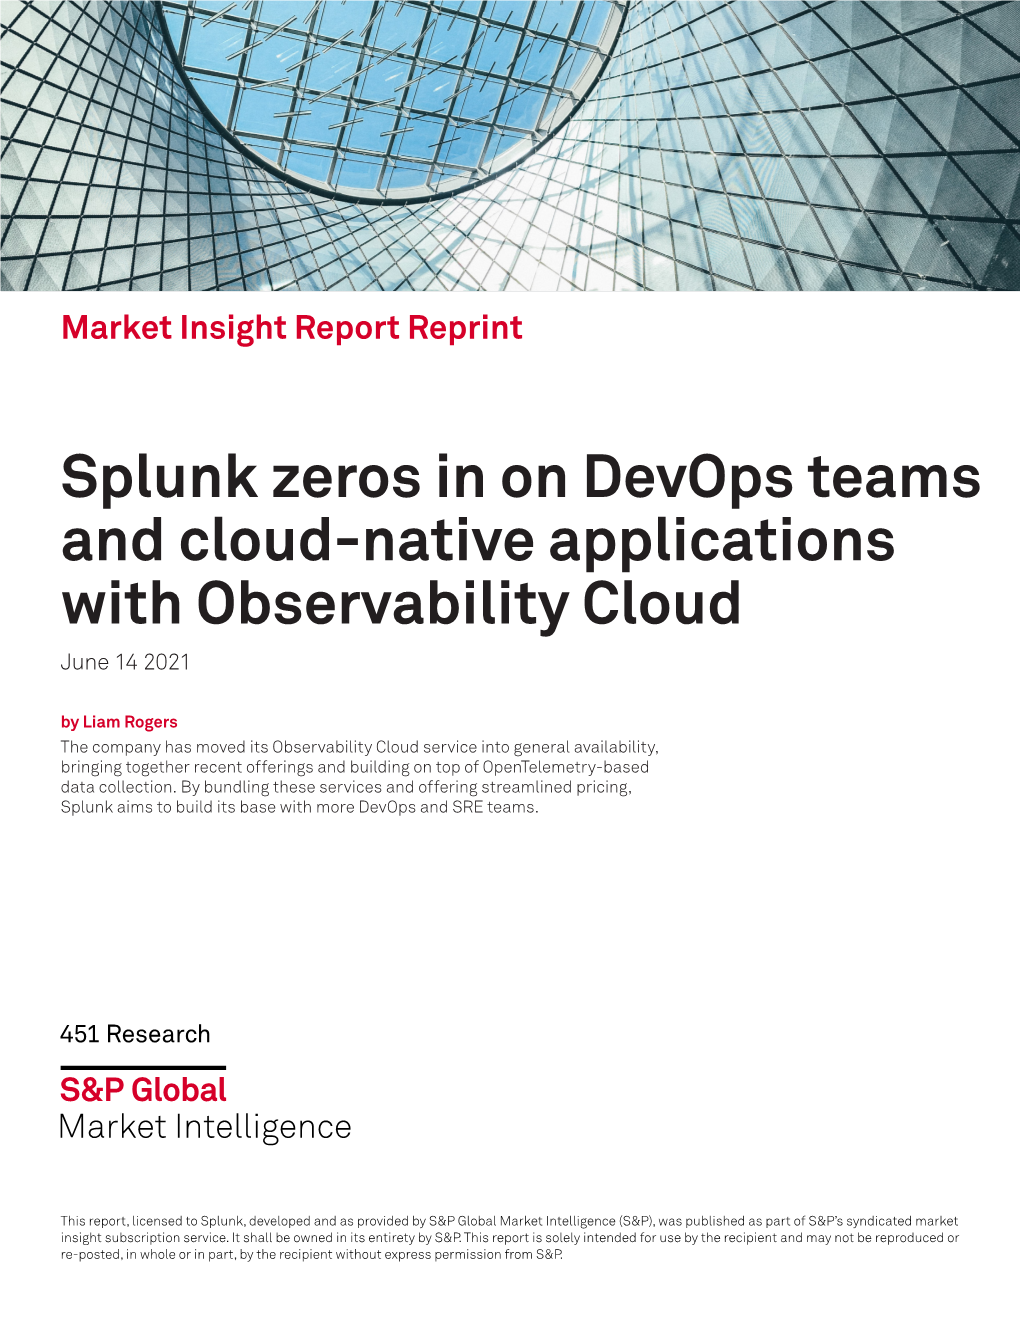 Splunk Zeros in on Devops Teams and Cloud-Native Applications With